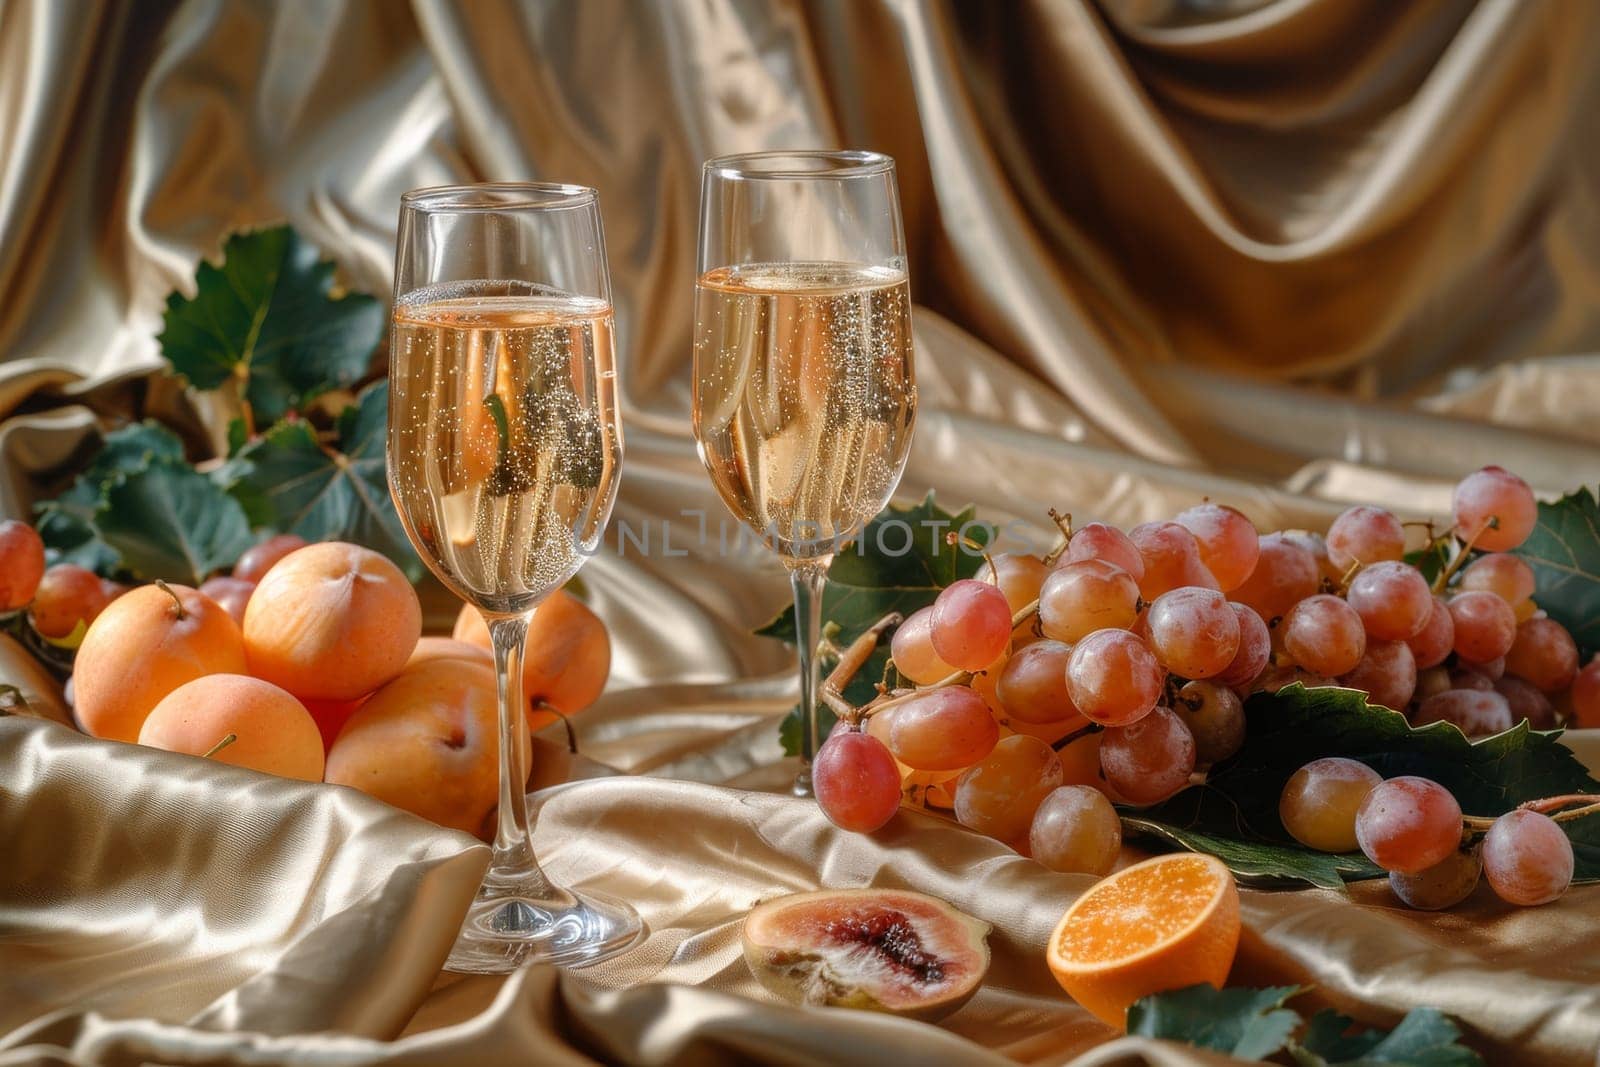 Two wine glasses filled with champagne are on a table with grapes. The wine glasses and grapes create a festive and celebratory atmosphere